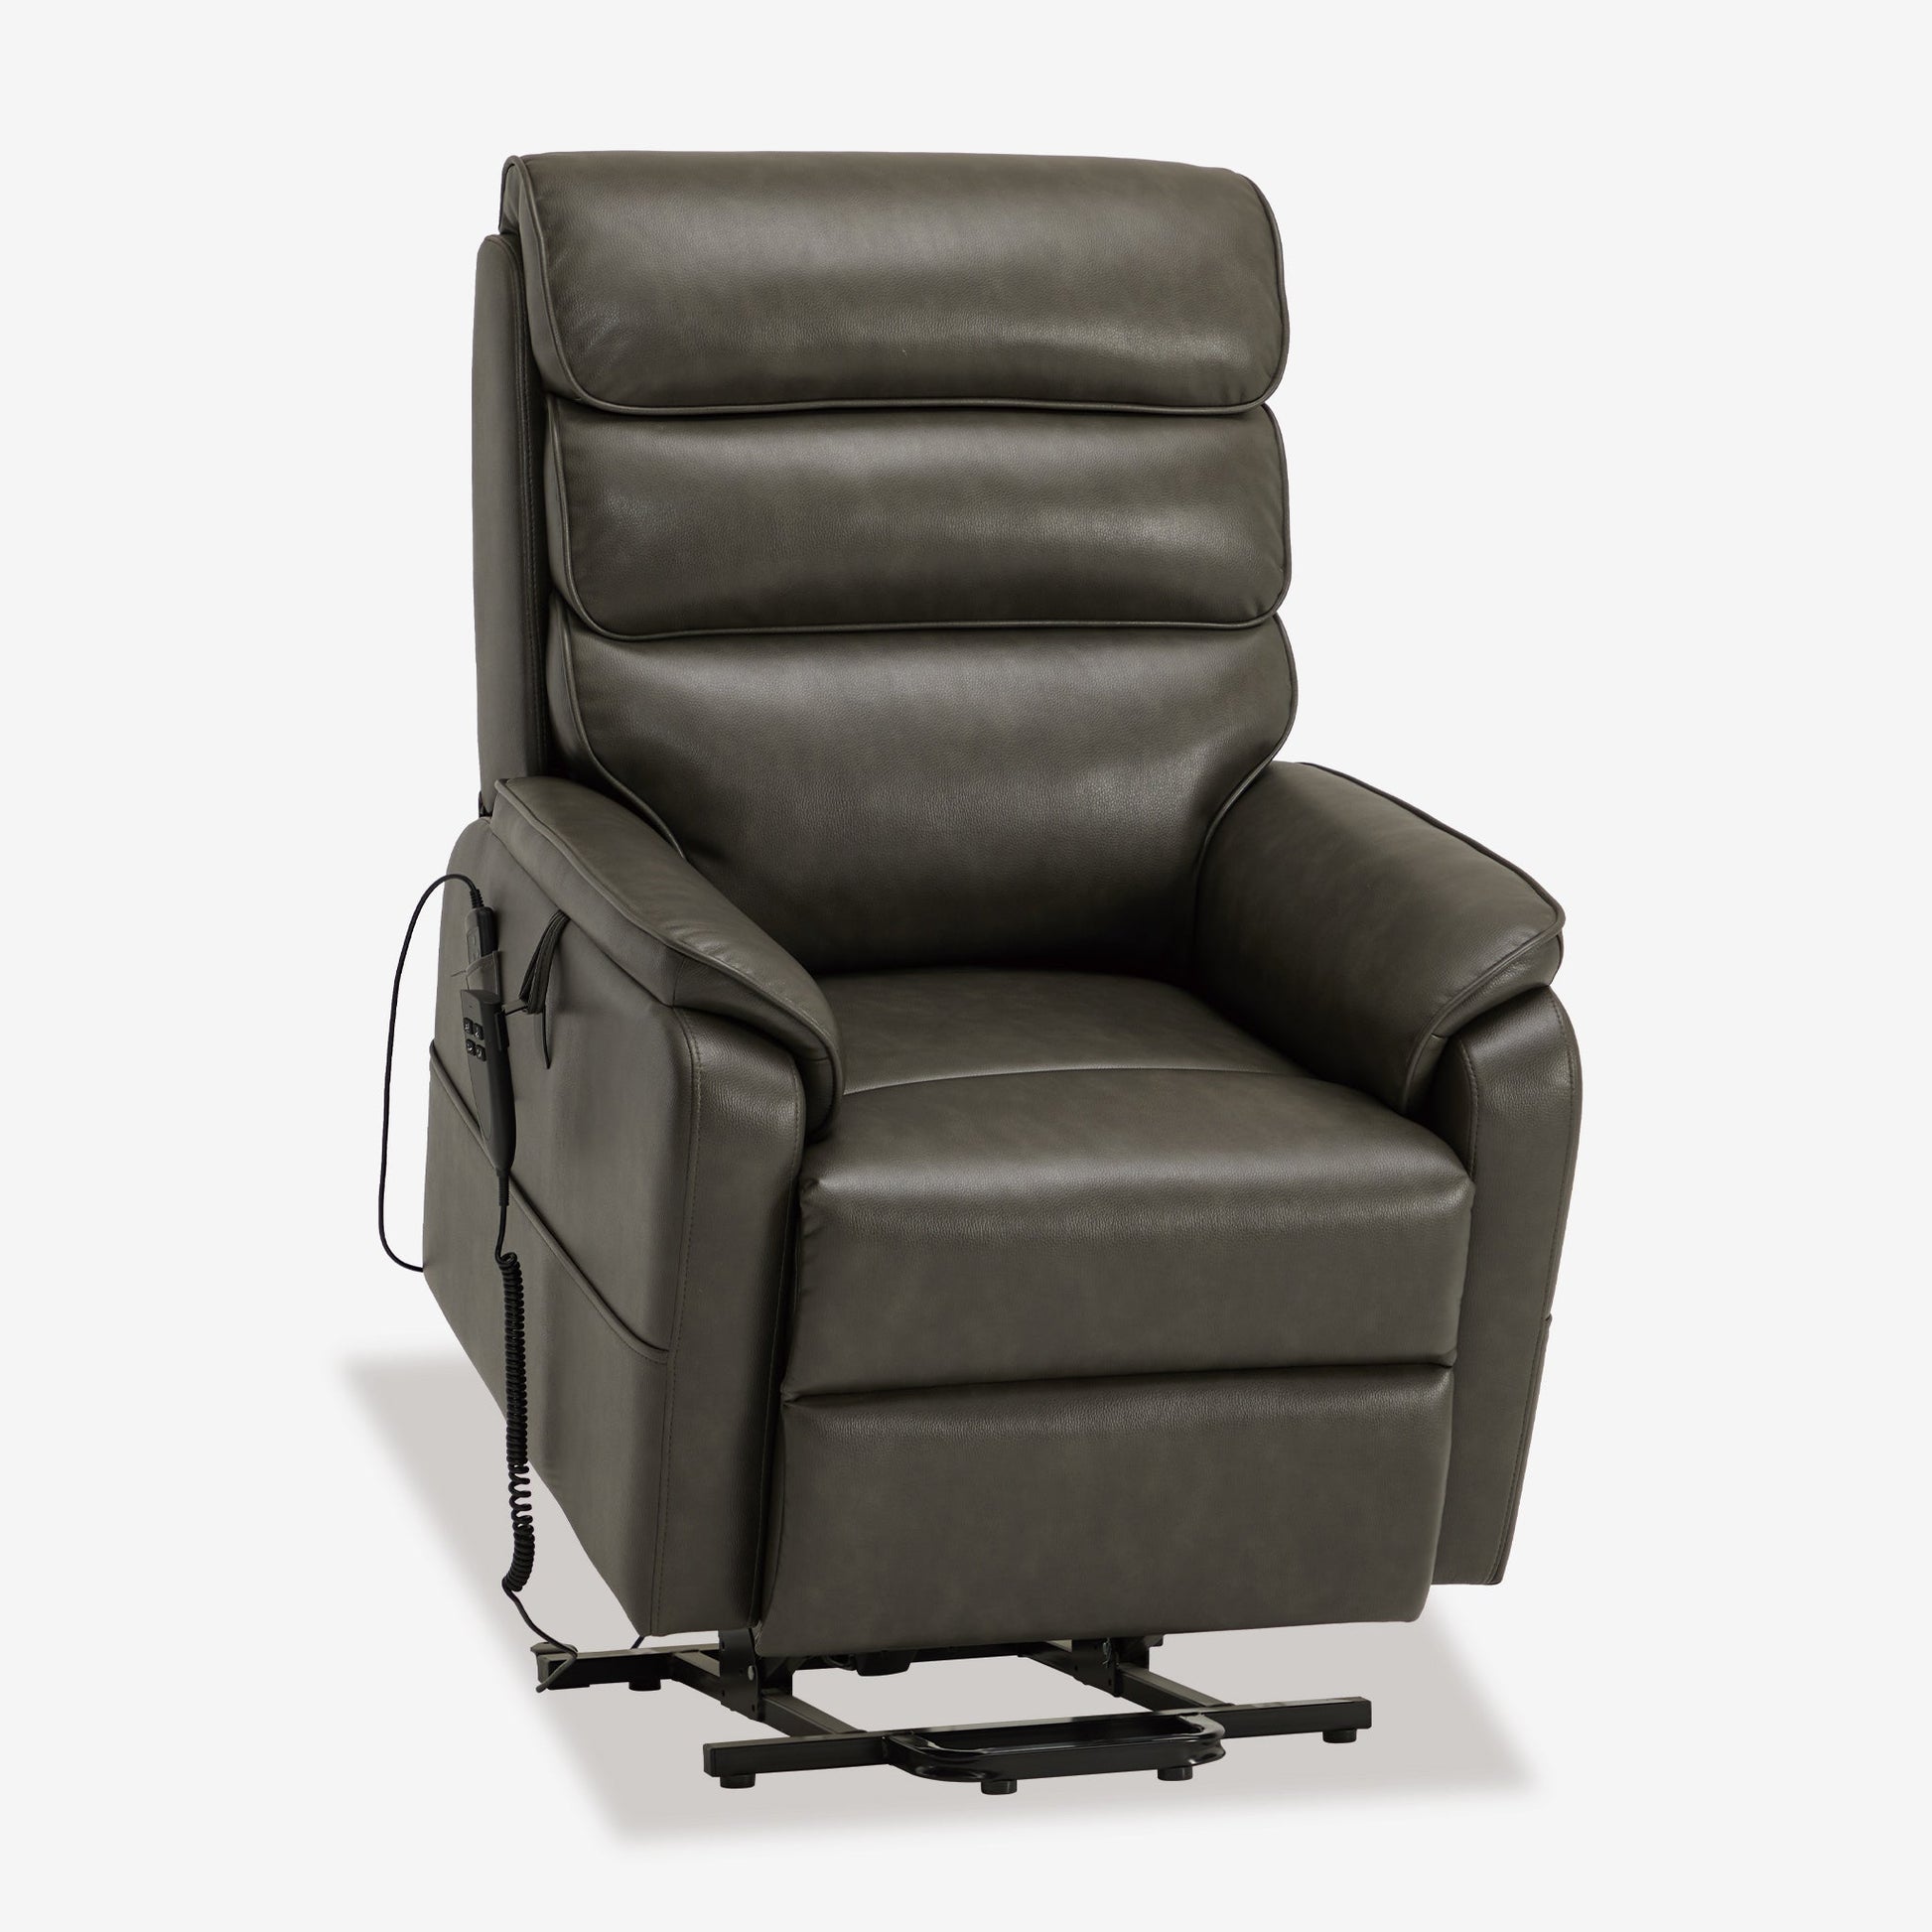 Lift Recliner With Heat And Massage, Infinite Positons, Lay Flat